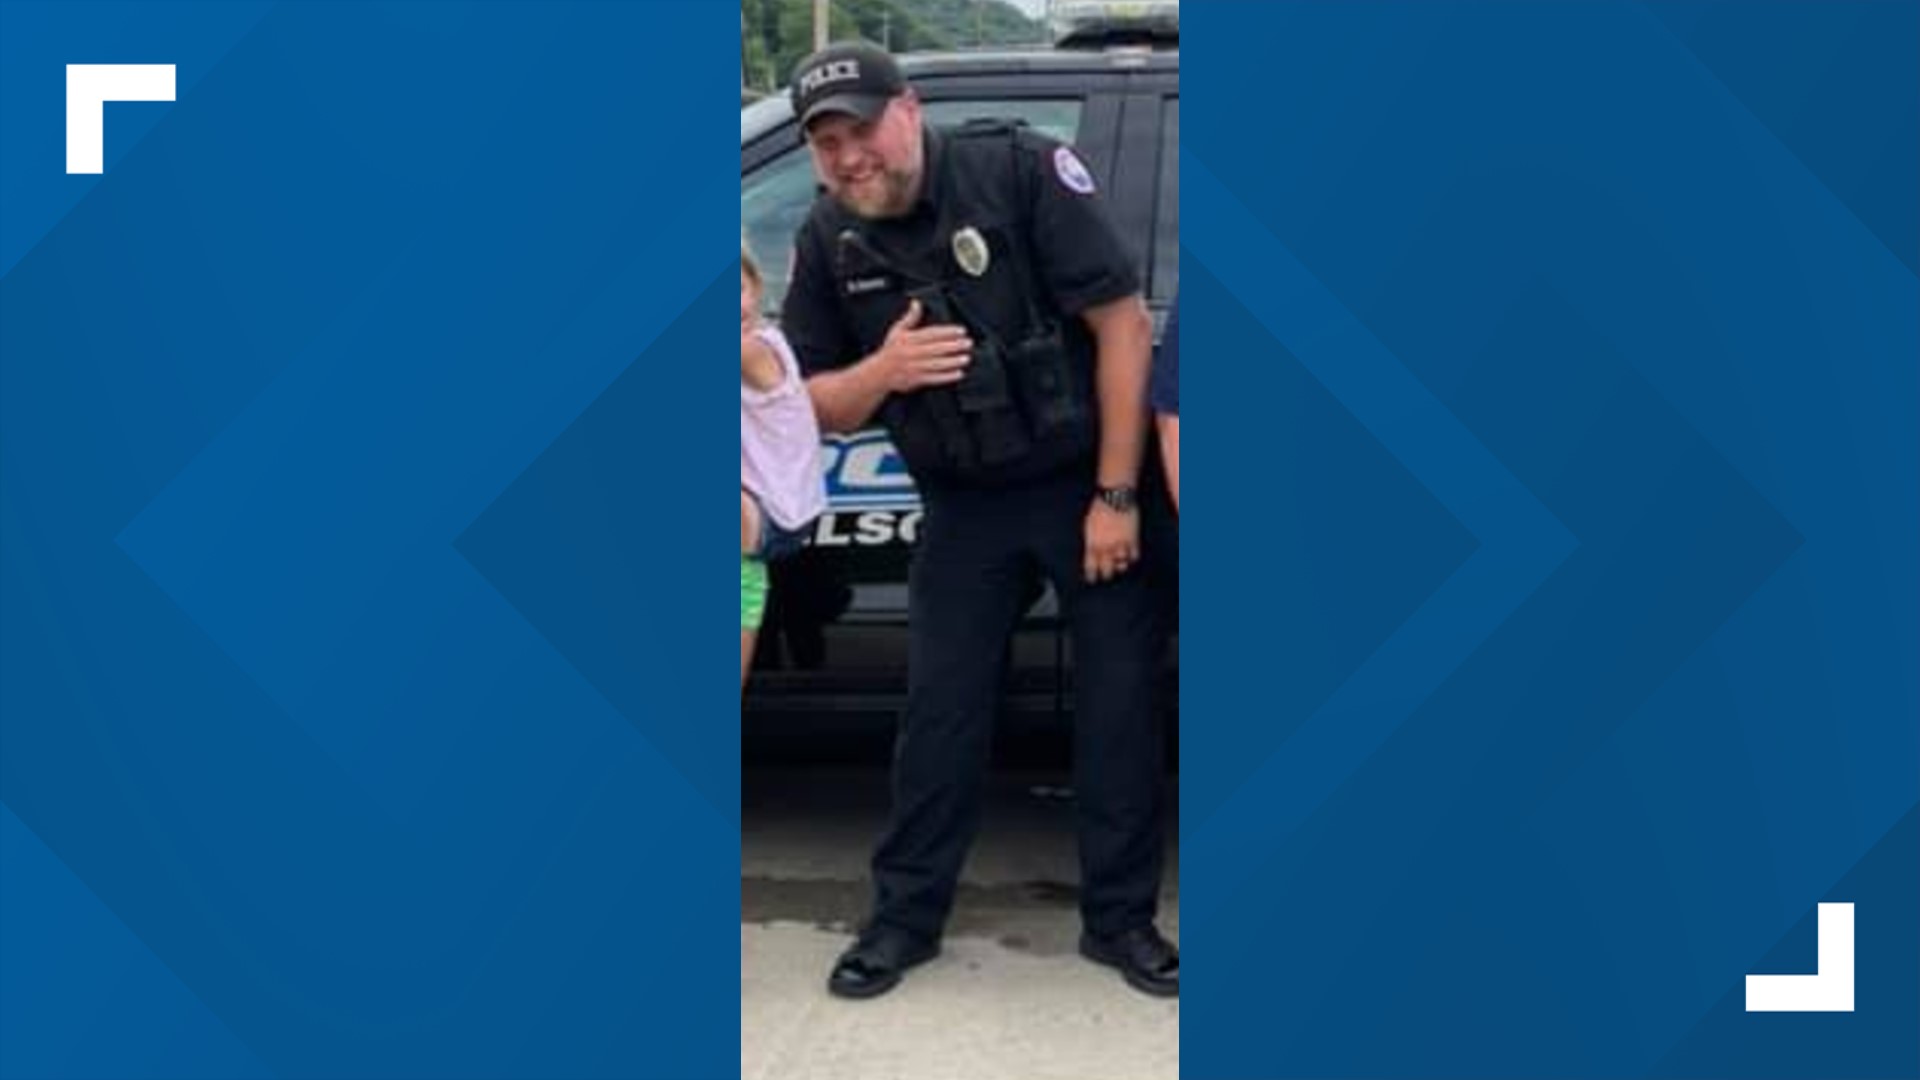 Nelsonville Police Chief Scott Fitch said 7-year veteran Scott Dawley died Tuesday afternoon in a crash while responding to a report of shots fired.